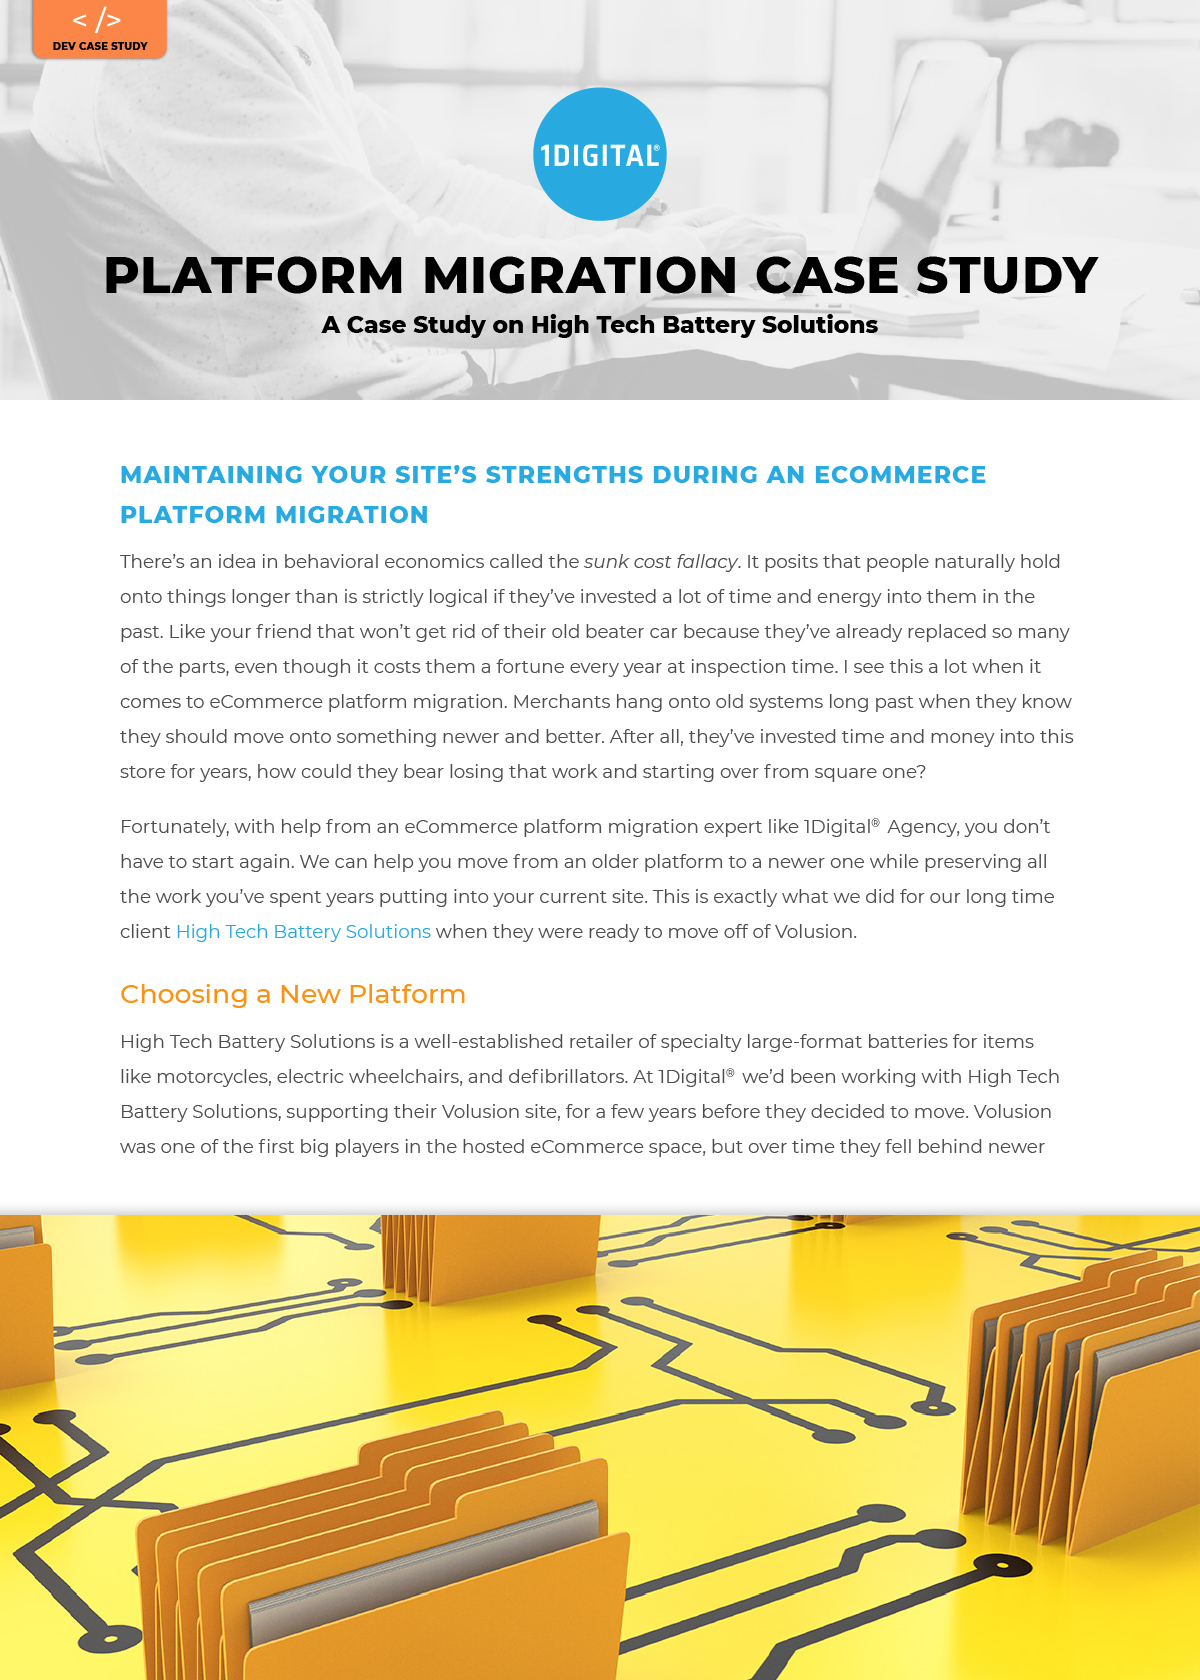 Maintaining Your Site’s Strengths During an eCommerce Platform Migration